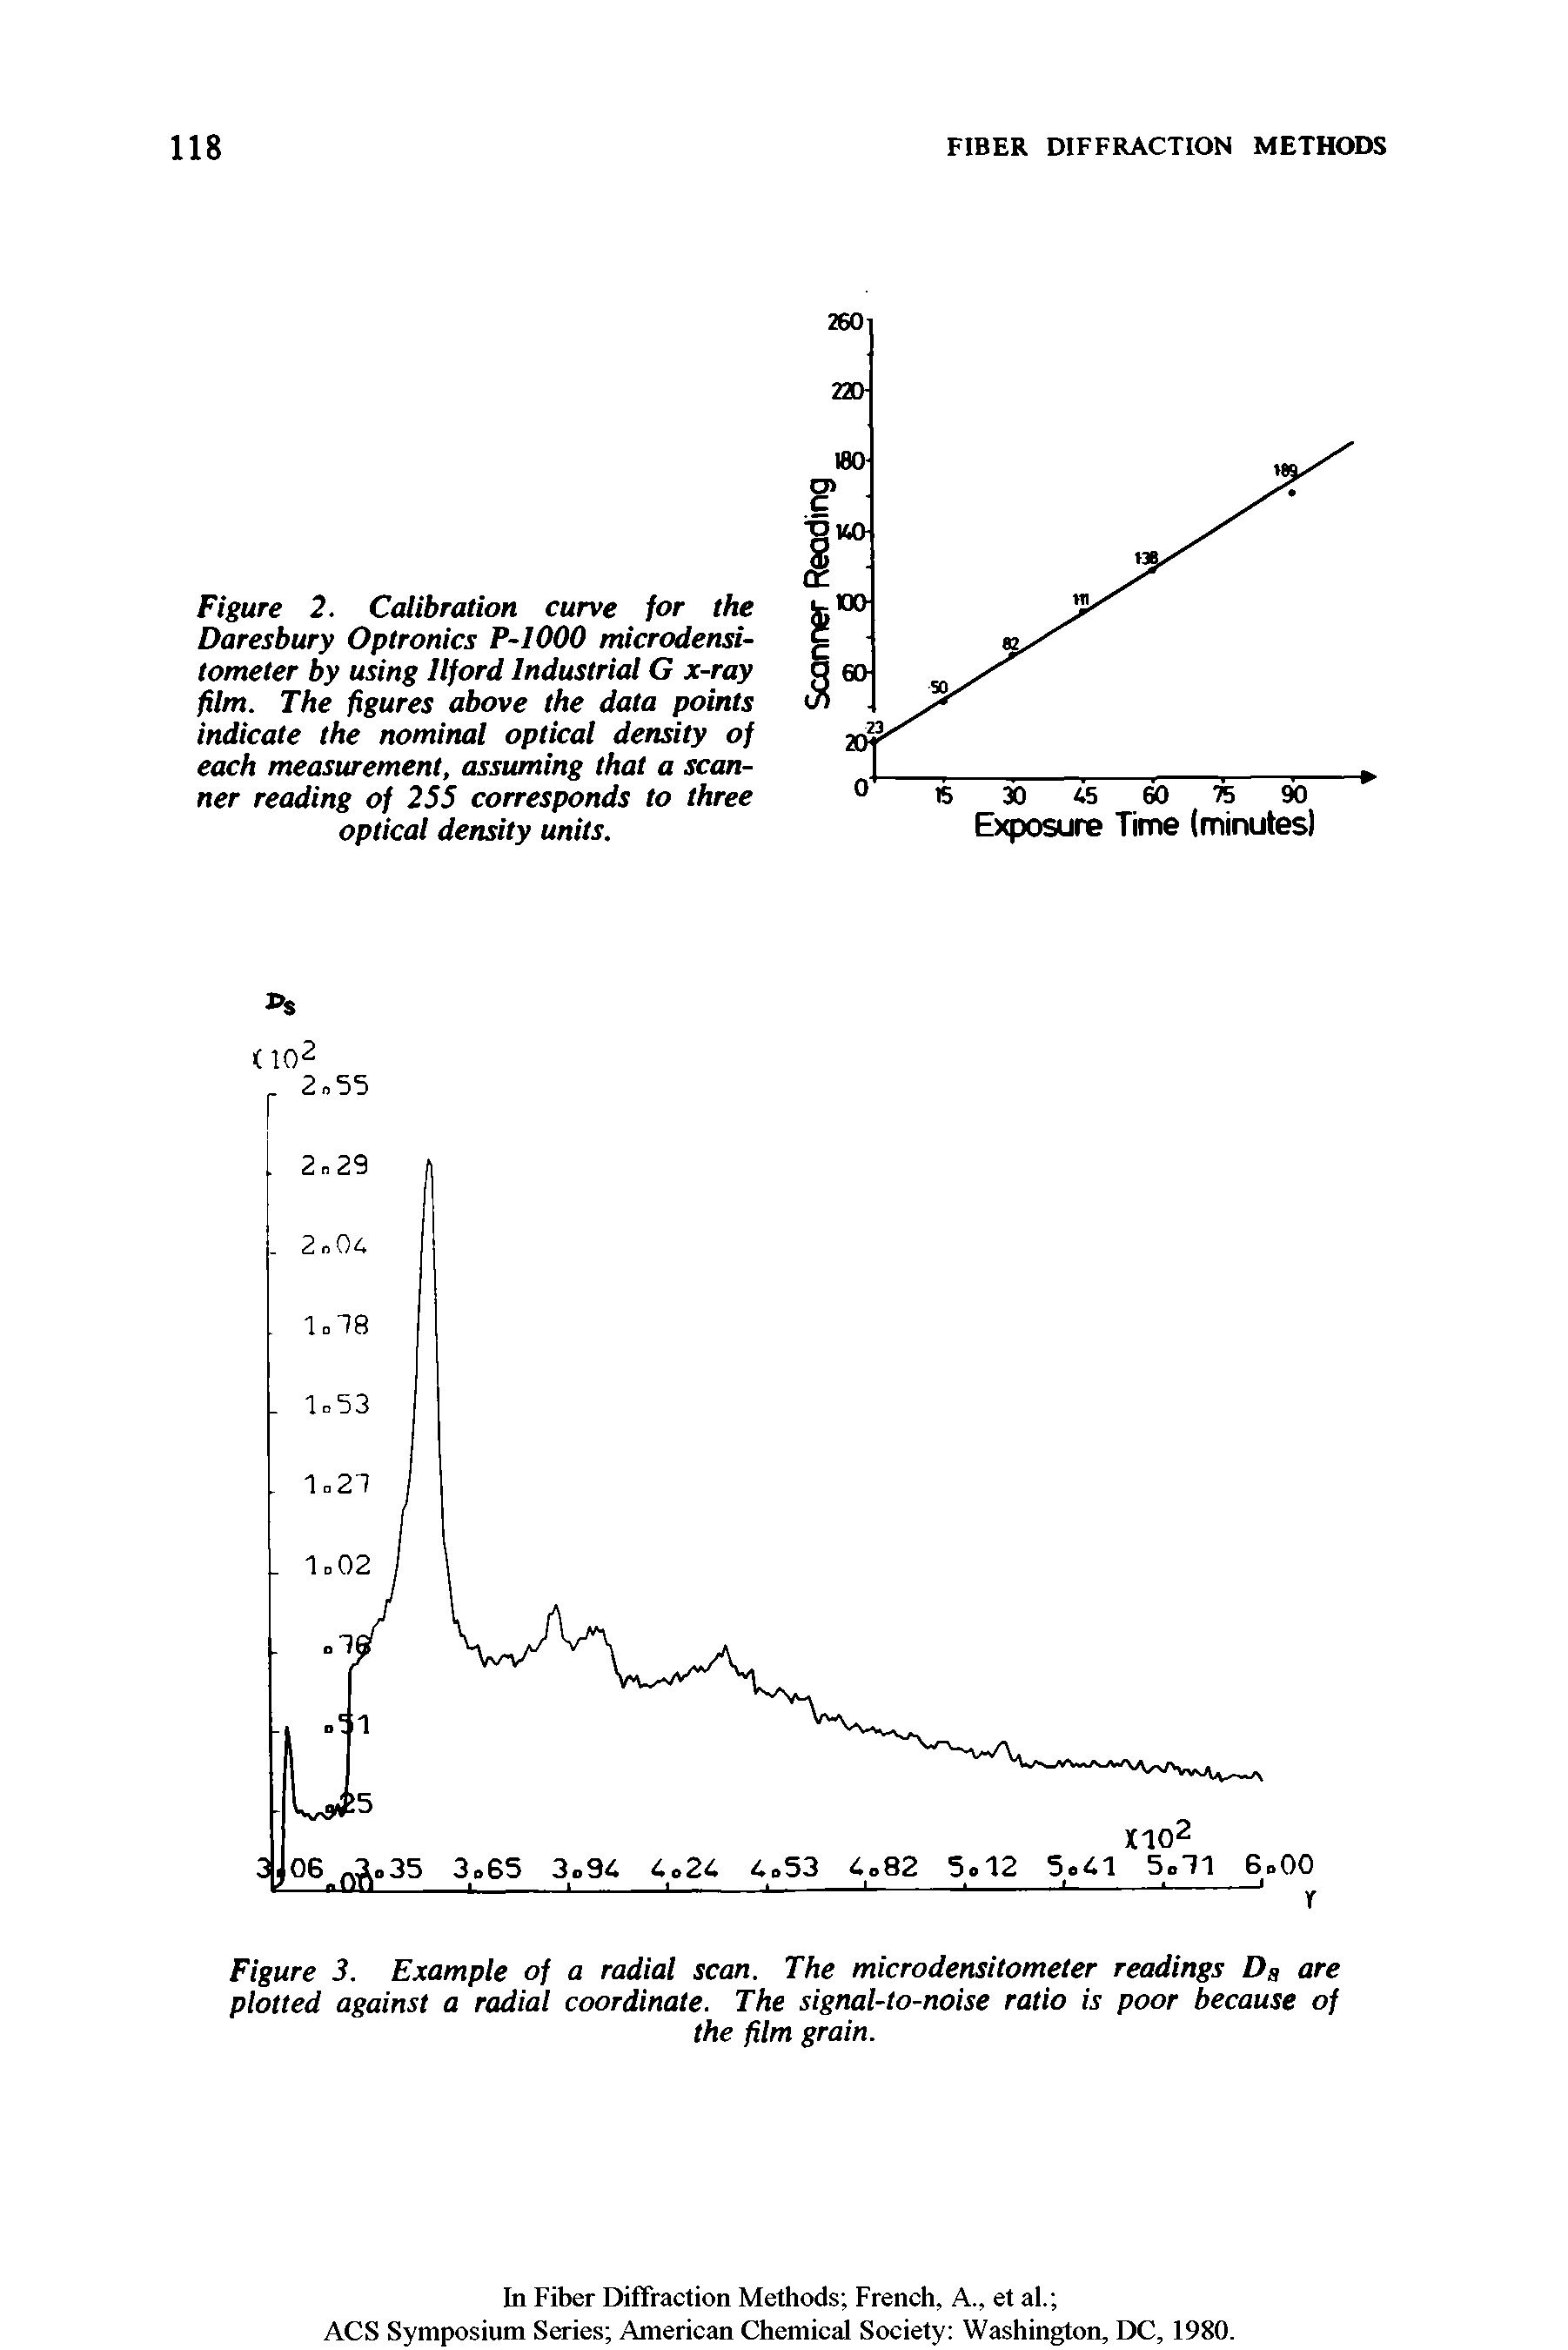 Figure 2. Calibration curve for the Daresbury Optronics P-1000 microdensitometer by using Ilford Industrial G x-ray film. The figures above the data points indicate the nominal optical density of each measurement, assuming that a scanner reading of 255 corresponds to three optical density units.